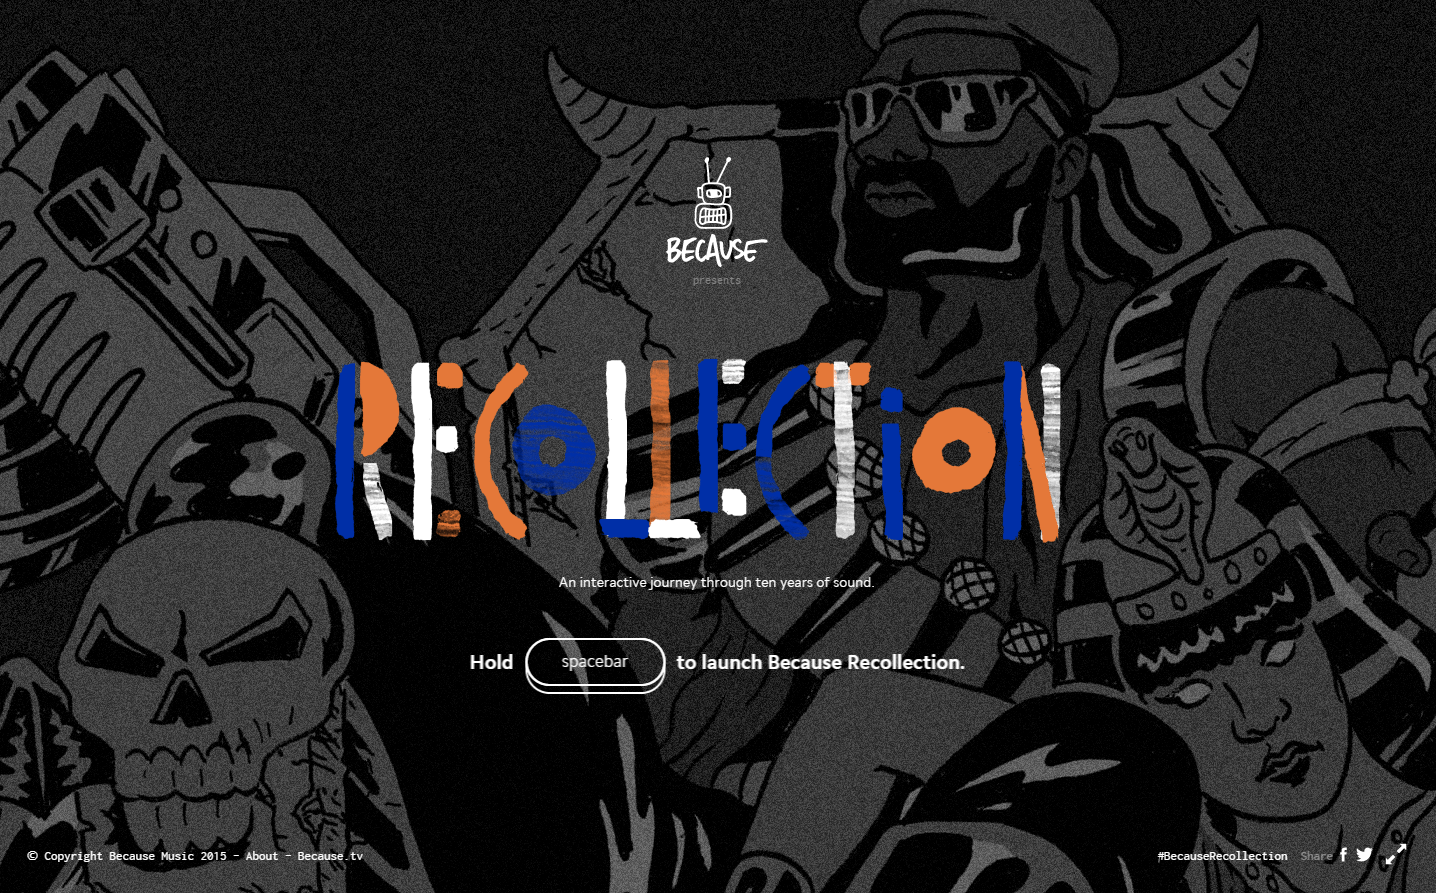 http://www.because-recollection.com/